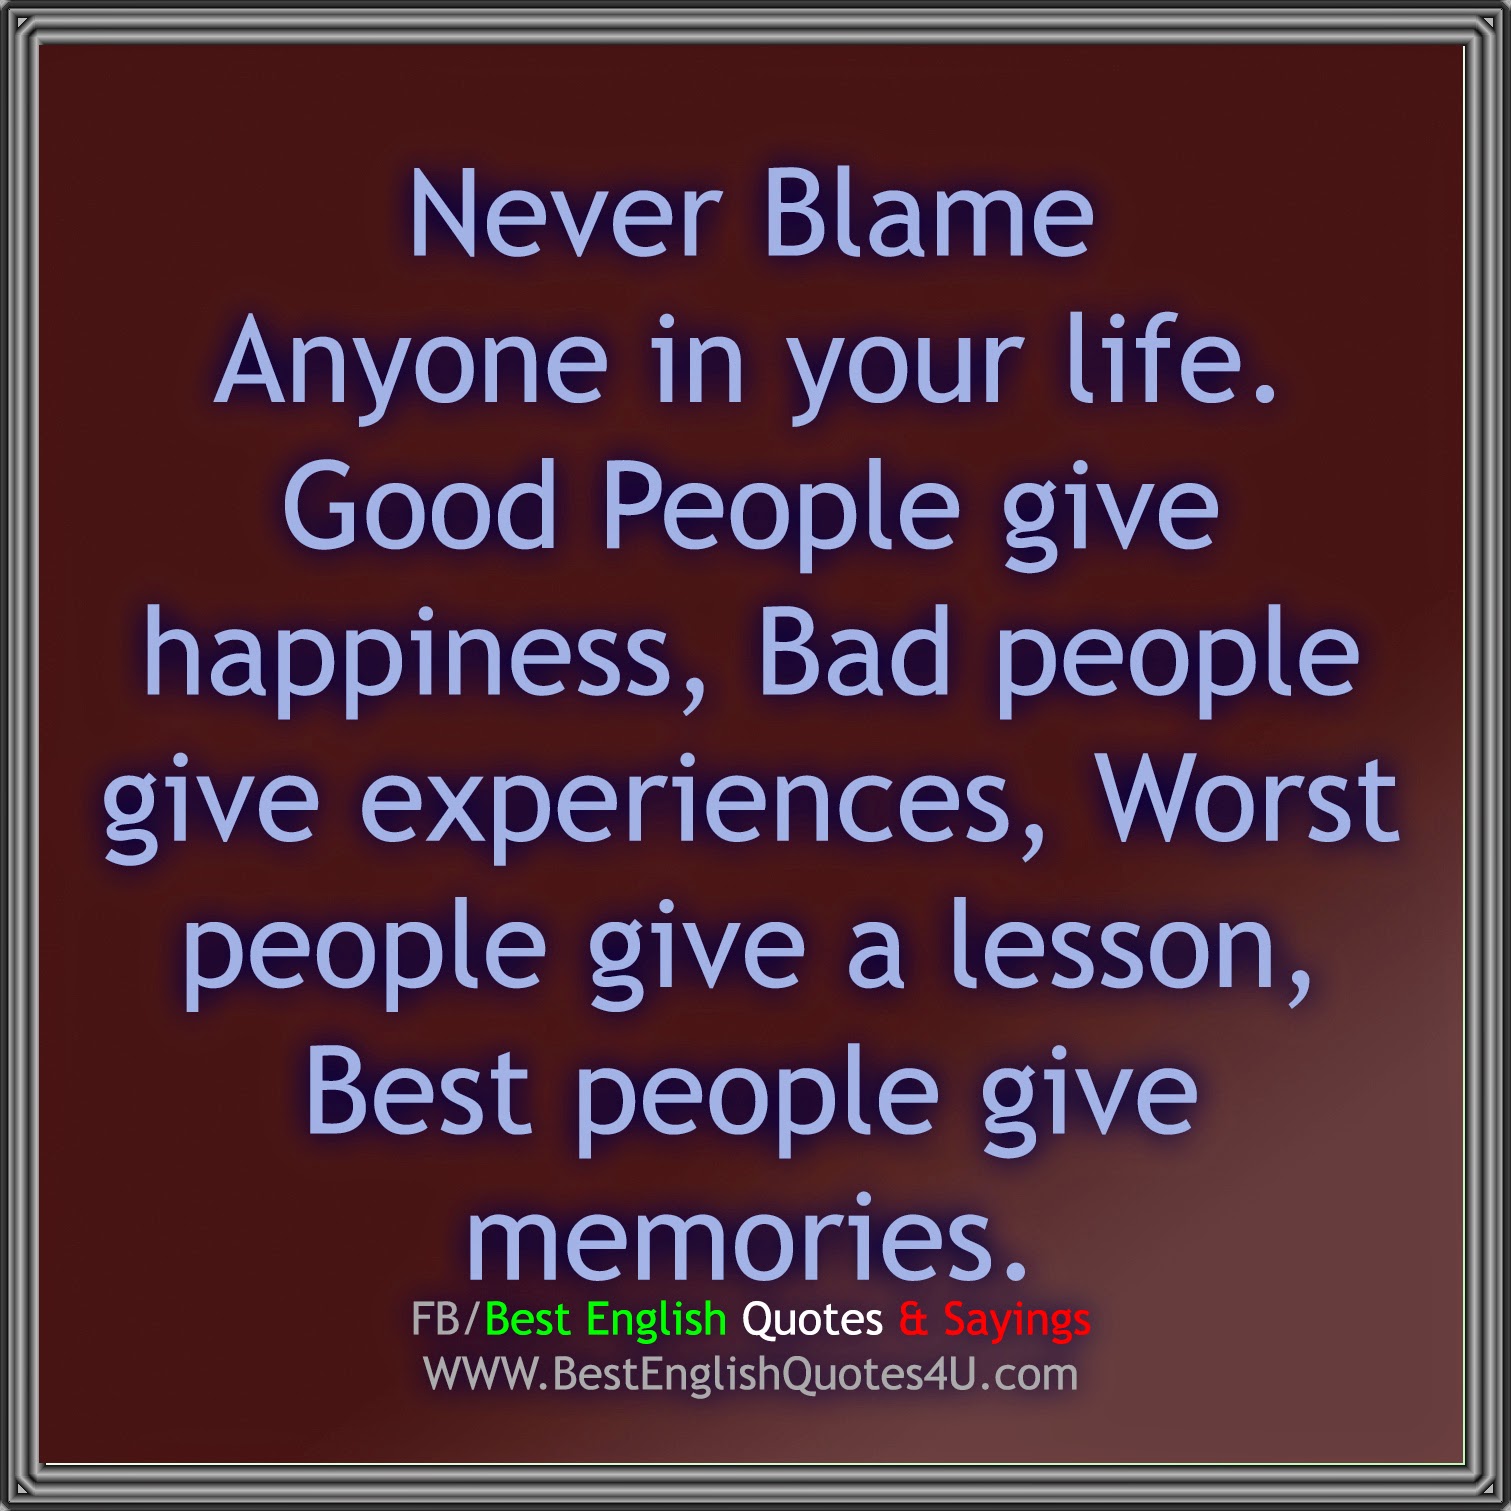 Never Blame Anyone in your life Good People give happiness Bad